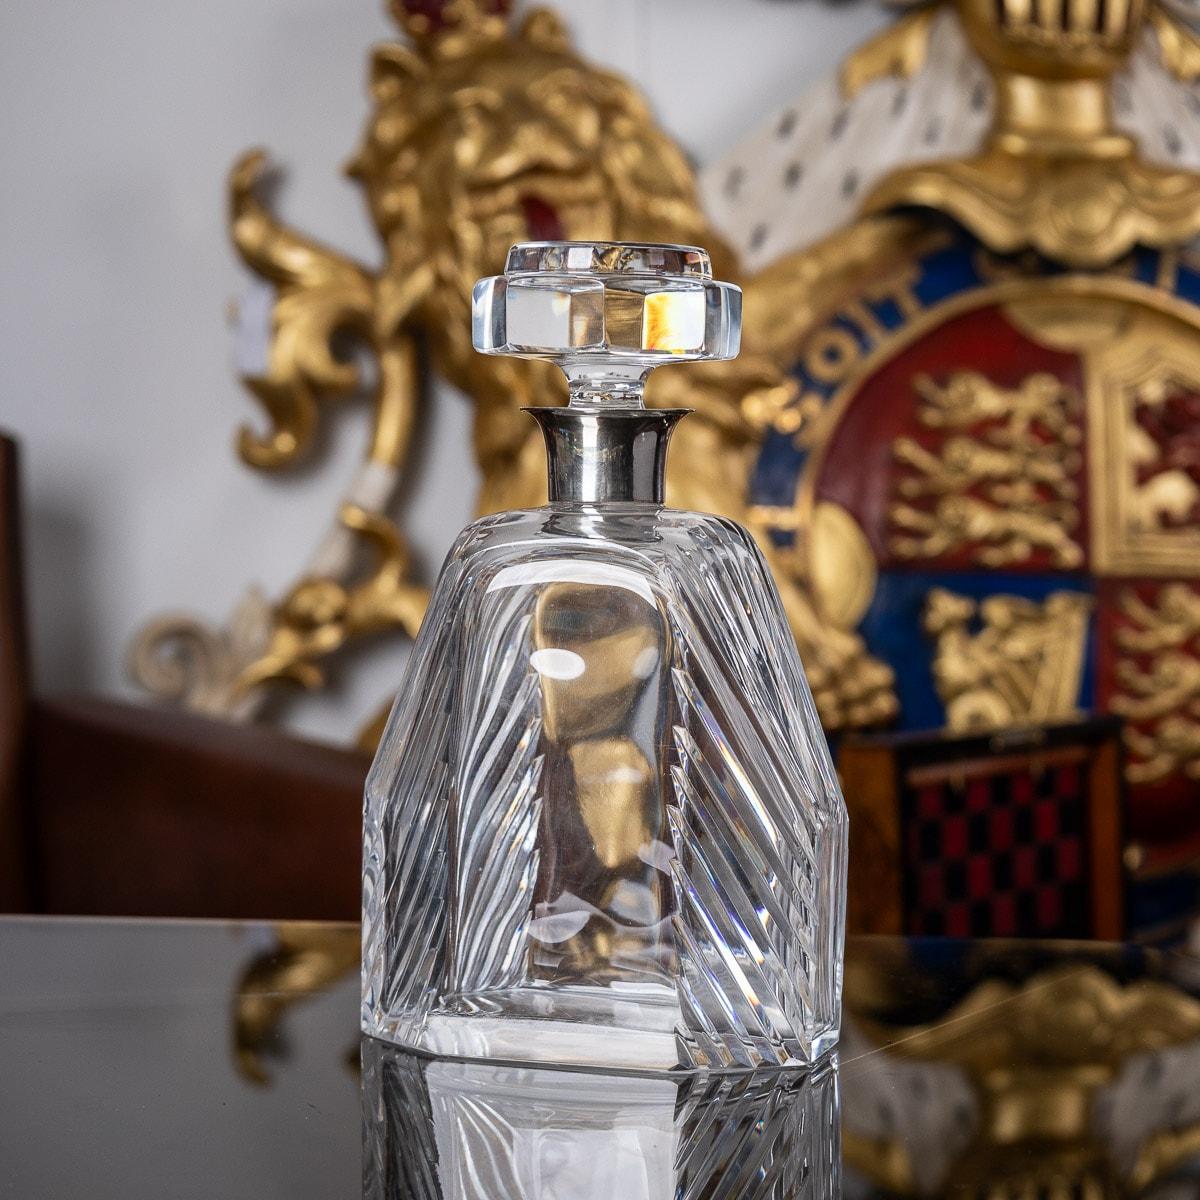 Antique early 20th century English Art Deco solid silver and glass large decanter. Of particularly large size with diagonally cut crystal glass body and mounted with elegant octagonal stopper. Applied with a stylized silver collar. This large